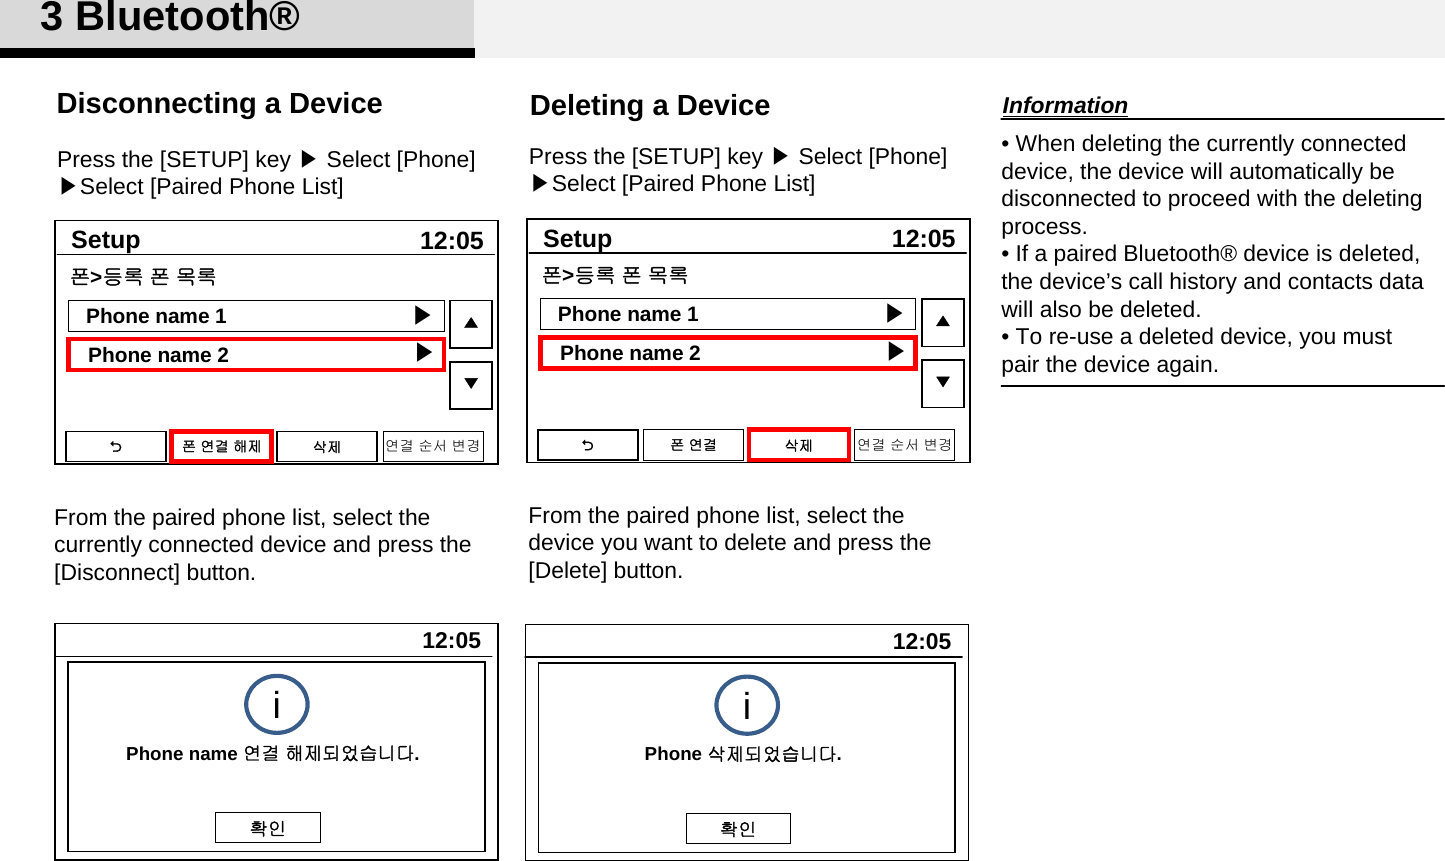 3 Bluetooth®From the paired phone list, select thecurrently connected device and press the [Disconnect] button.Disconnecting a Device• When deleting the currently connected device, the device will automatically be disconnected to proceed with the deleting process. • If a paired Bluetooth® device is deleted, the device’s call history and contacts data will also be deleted.• To re-use a deleted device, you must pair the device again. From the paired phone list, select thedevice you want to delete and press the[Delete] button.InformationDeleting a DevicePress the [SETUP] key ▶Select [Phone] ▶Select [Paired Phone List]Press the [SETUP] key ▶Select [Phone] ▶Select [Paired Phone List]12:05SetupPhone name 1Phone name 2▲▼폰&gt;등록 폰 목록▶▶폰연결해제 삭제 연결 순서 변경12:05SetupPhone name 1Phone name 2▲▼폰&gt;등록 폰 목록▶▶폰연결 삭제 연결 순서 변경12:05트랙 01Phone 삭제되었습니다.확인i12:05트랙 01Phone name 연결 해제되었습니다.확인i